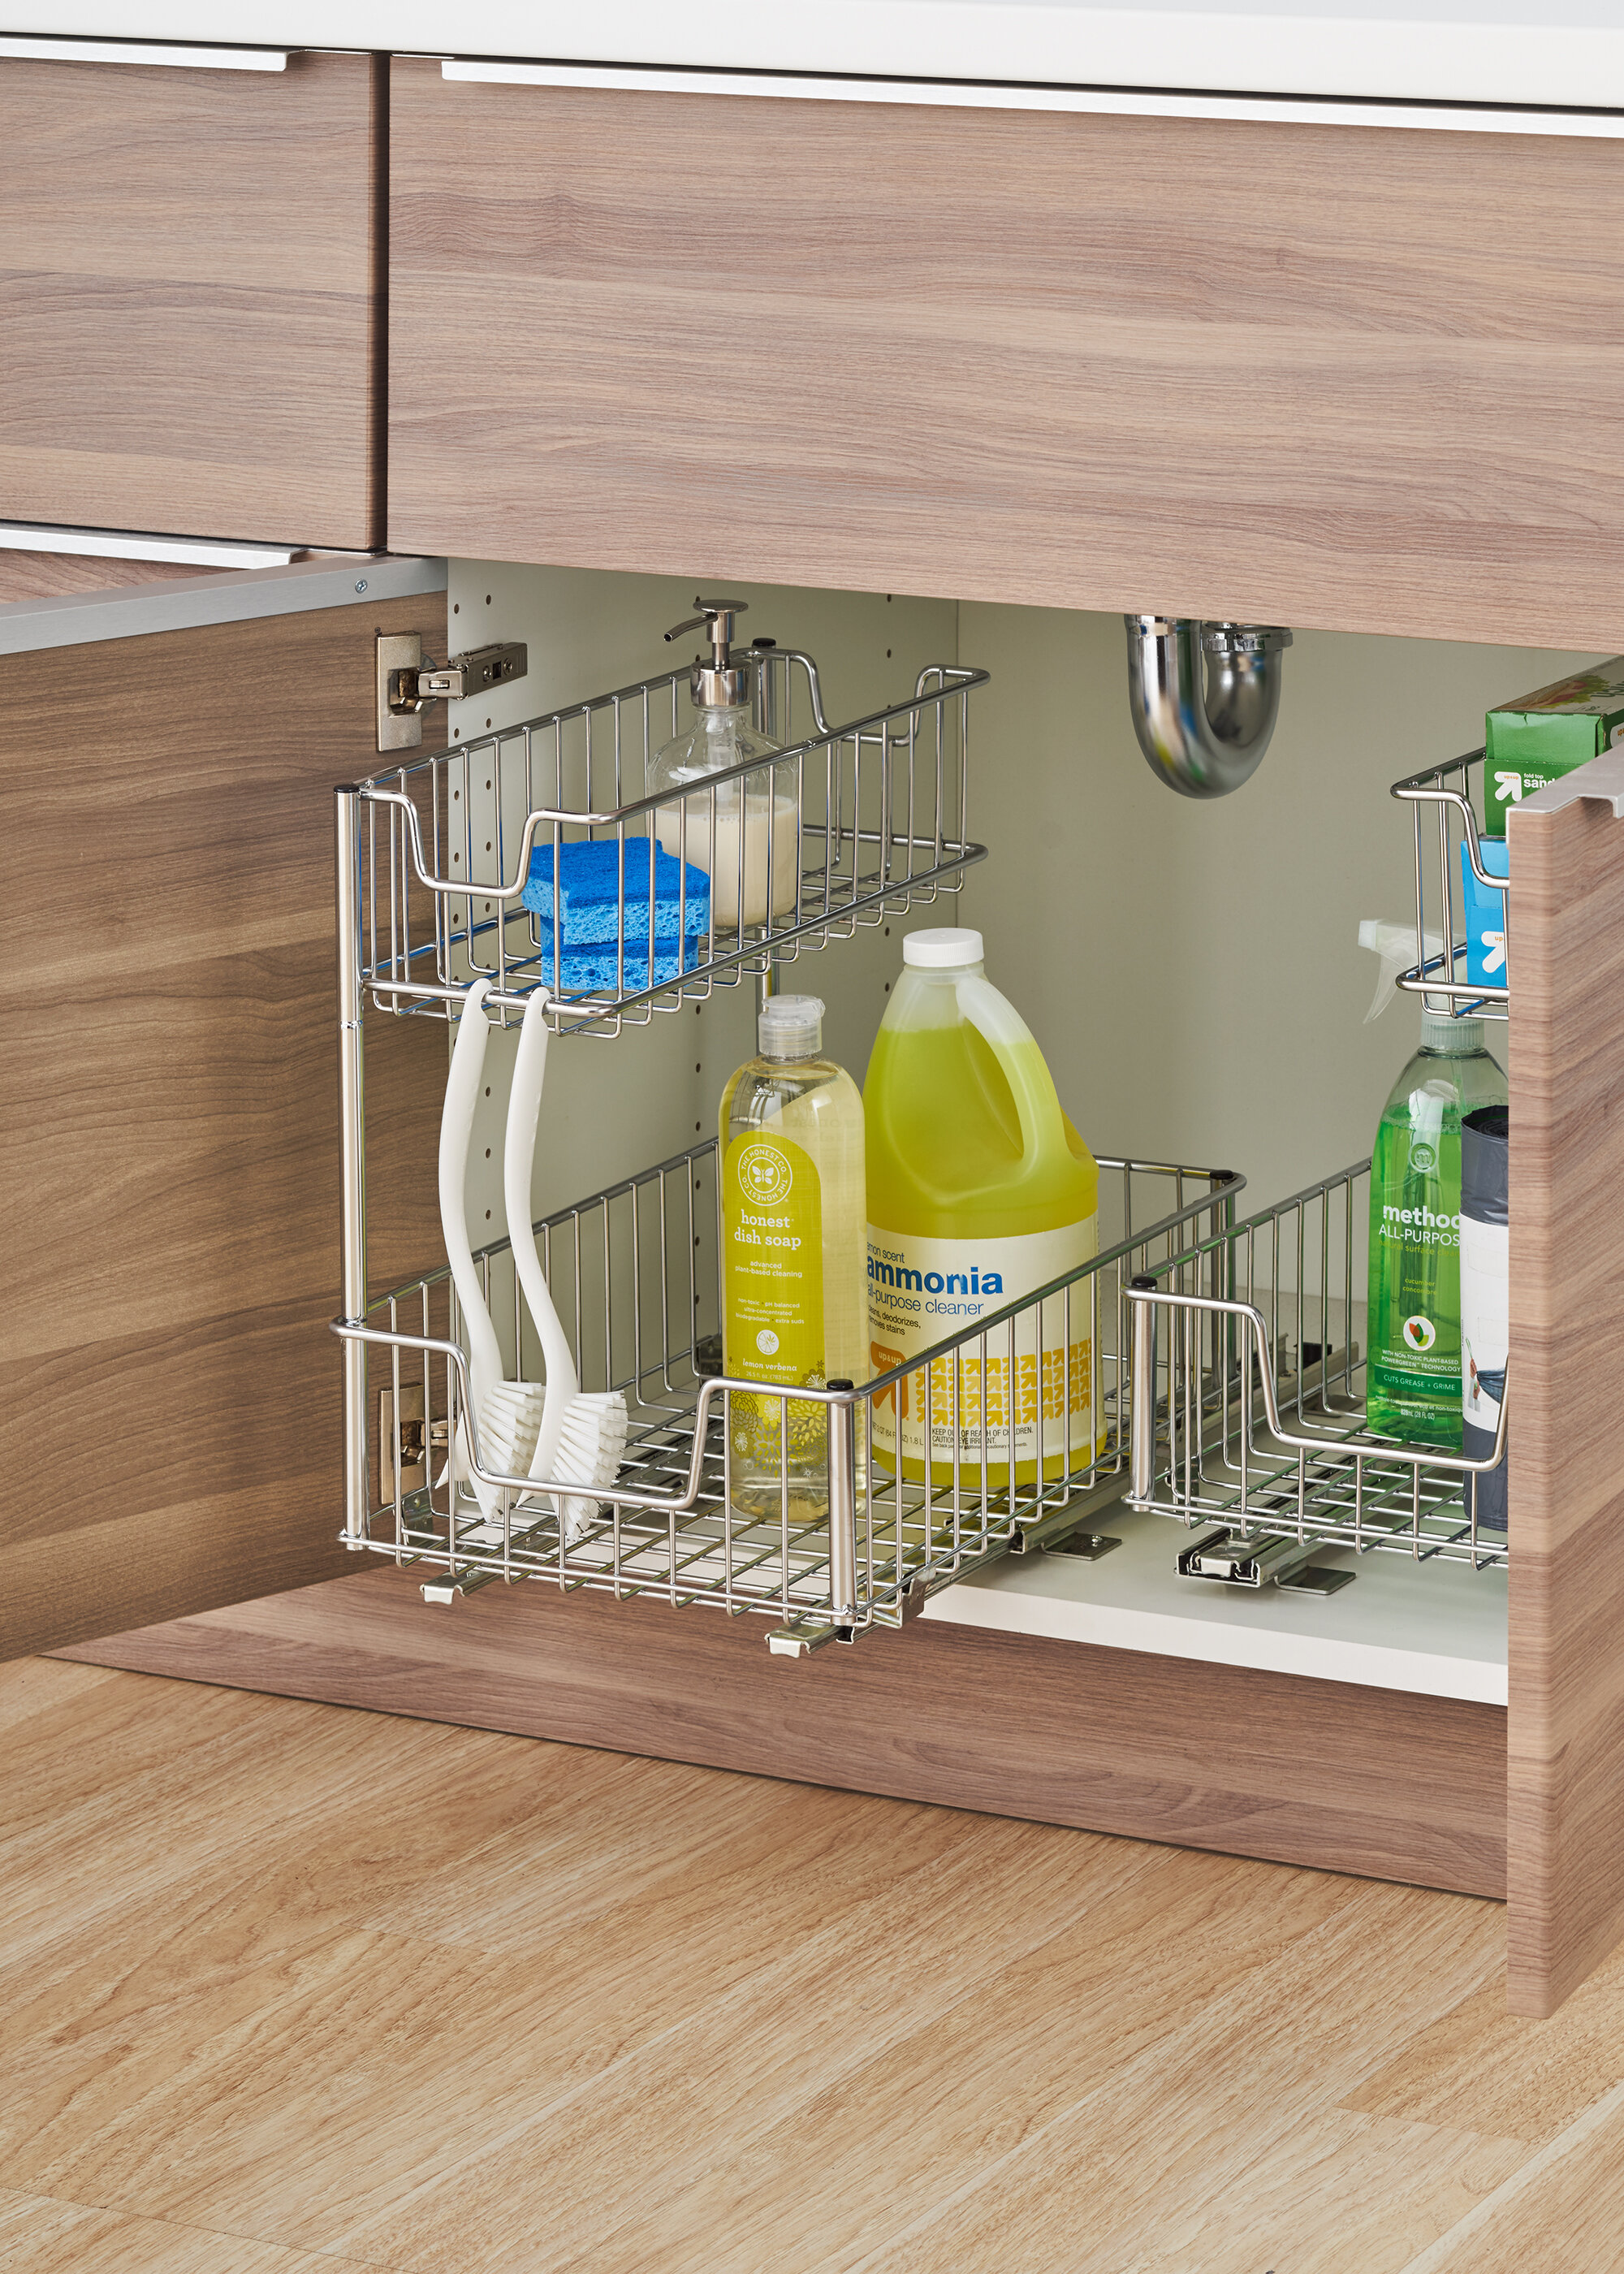 Undersink Cabinet Organizer with Pull Out Baskets - The Kim Six Fix